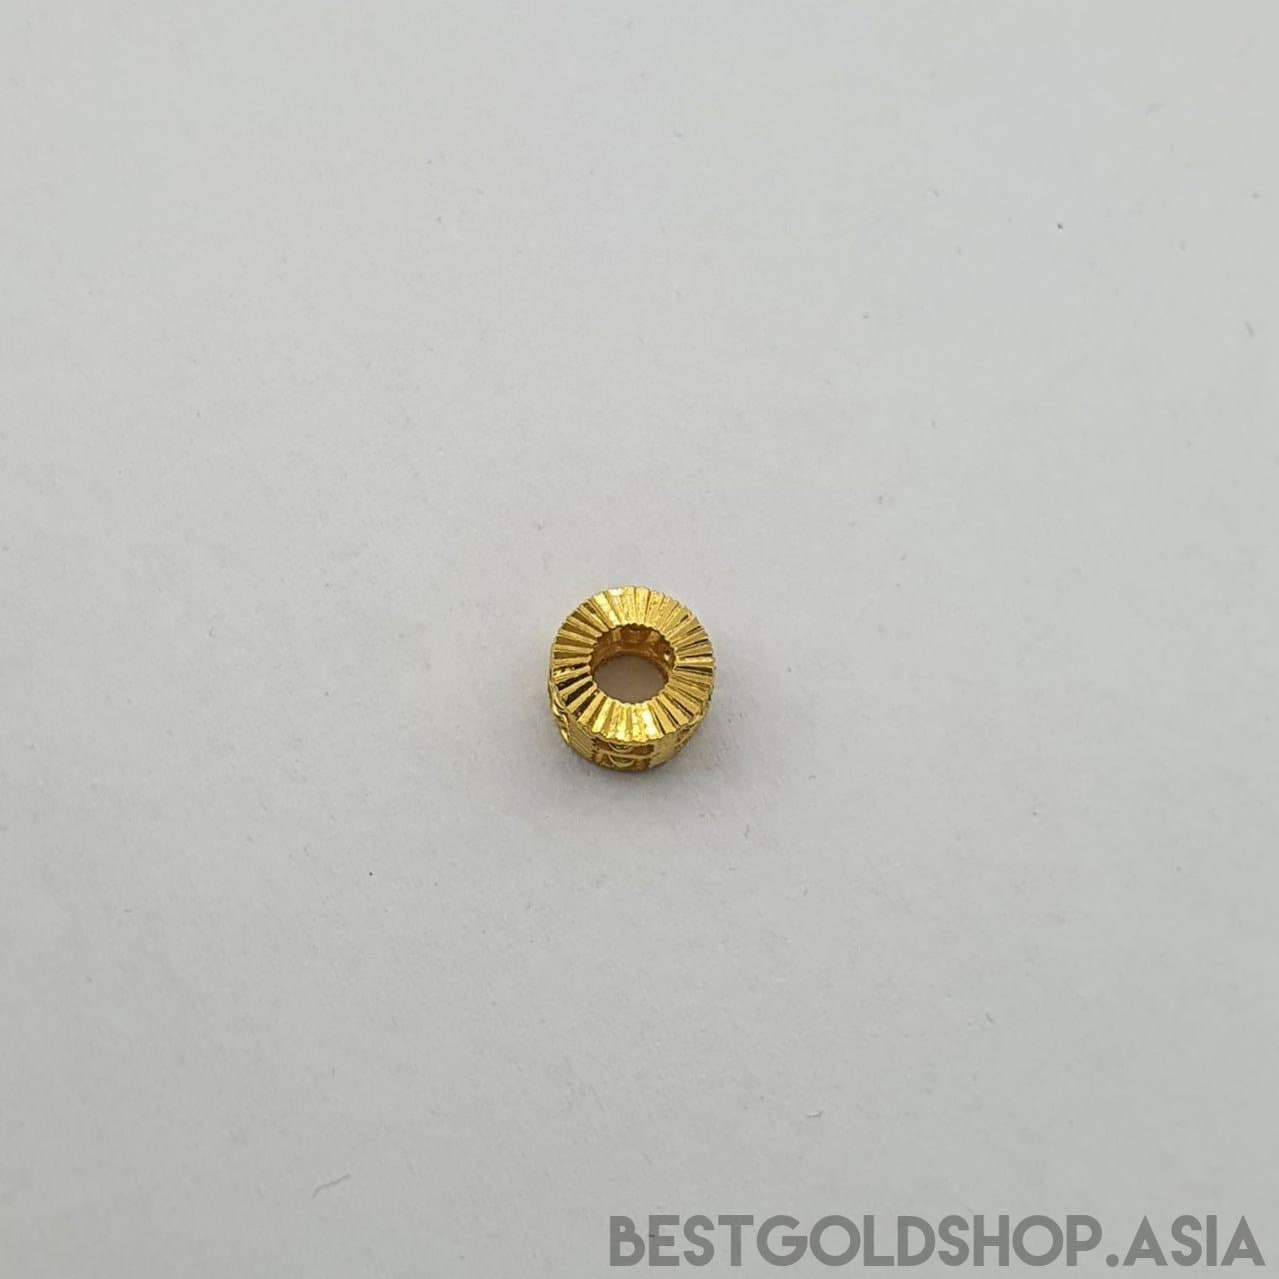 22k / 916 gold full abacus pendant / charms-916 gold-Best Gold Shop